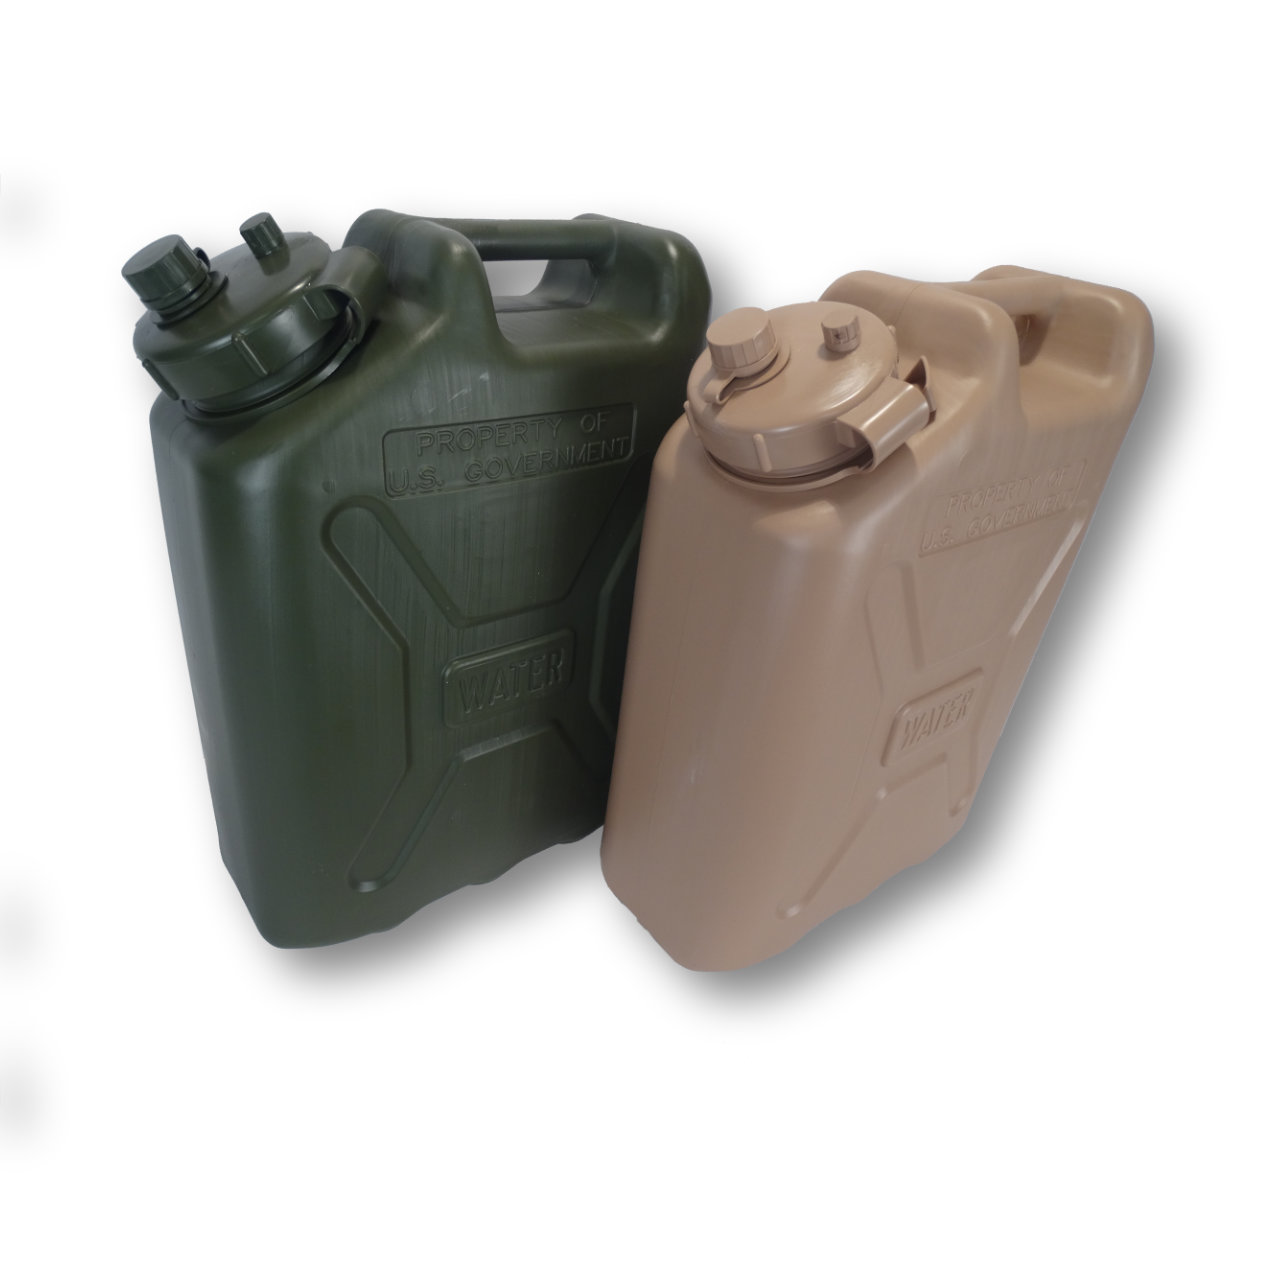 Water Jerry Can (5-gallon)